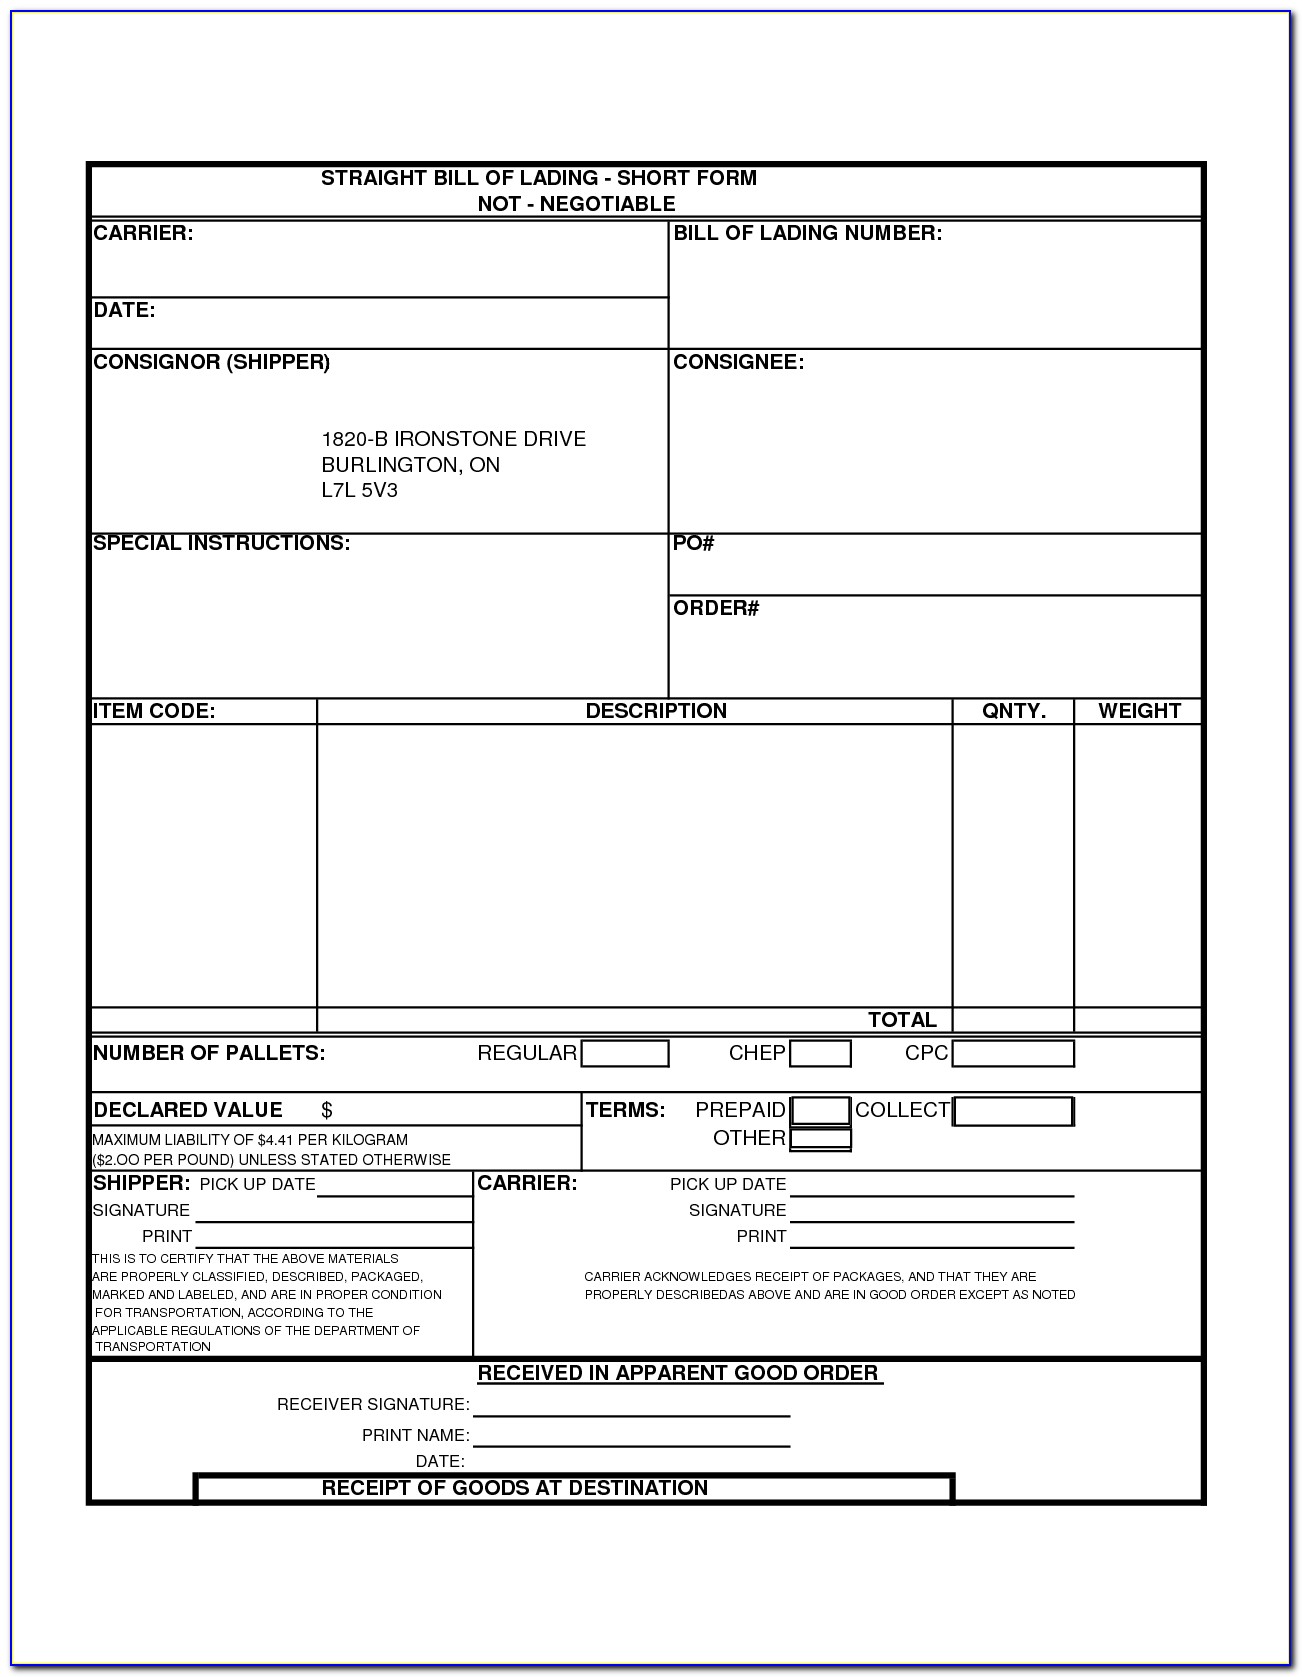 Bill Of Lading Form Fedex Freight